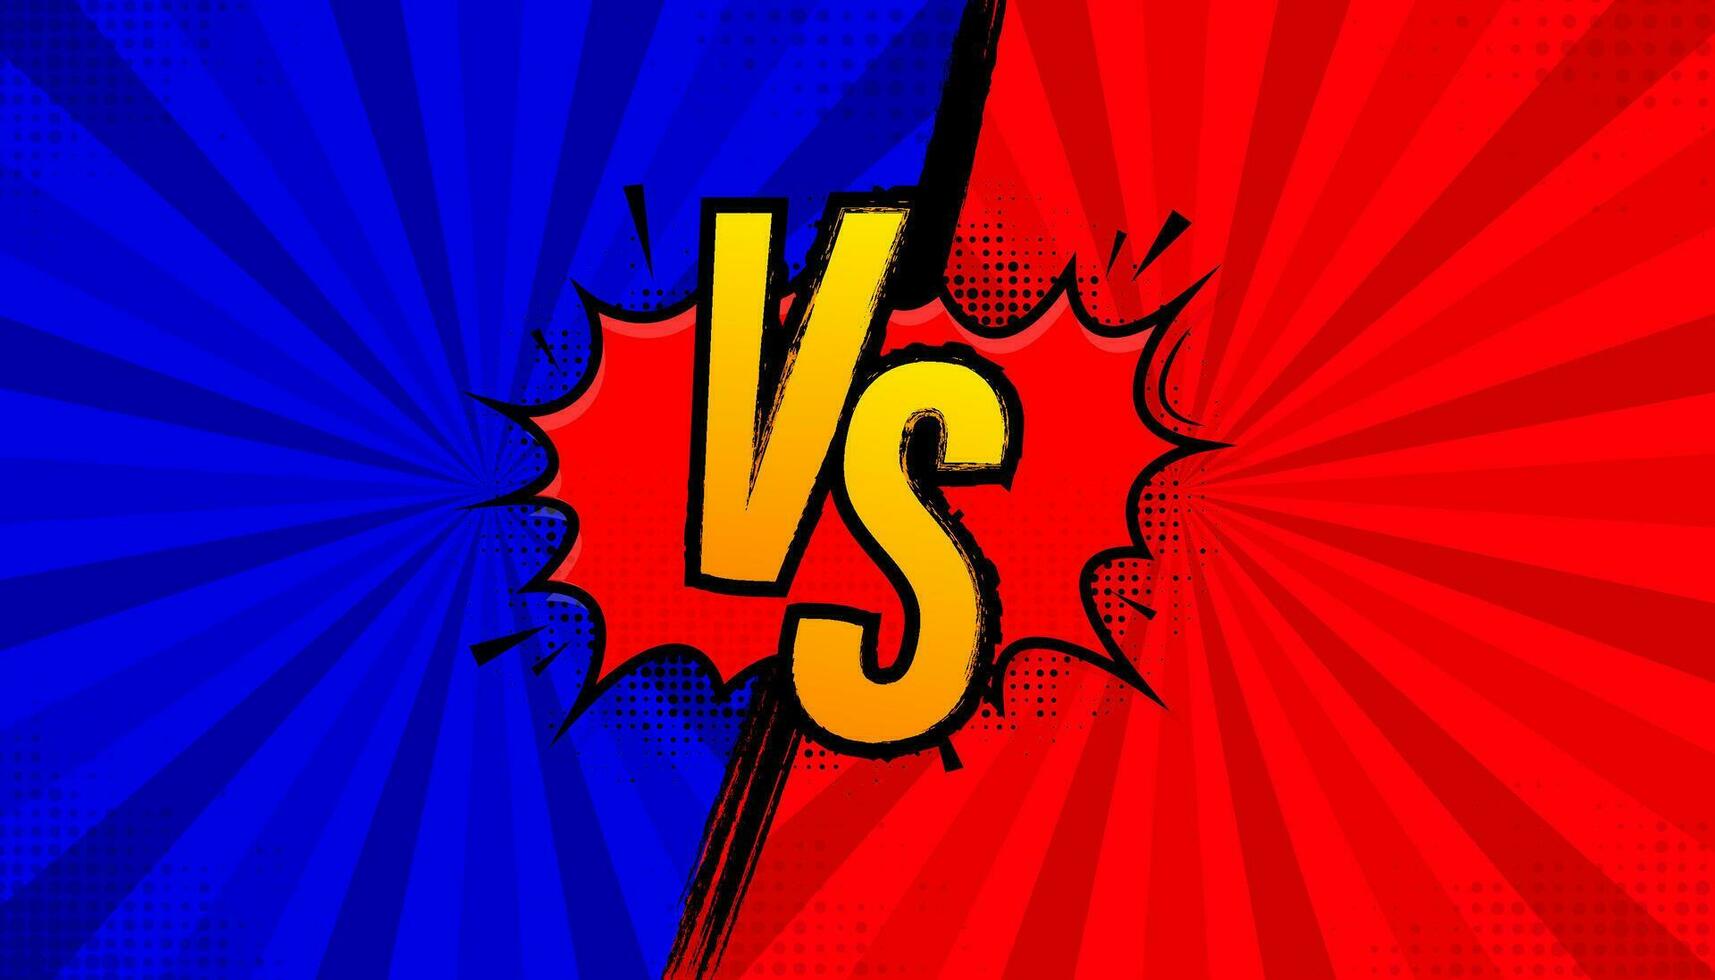 Versus logo vs letters for sports and fight competition. Battle vs match vector